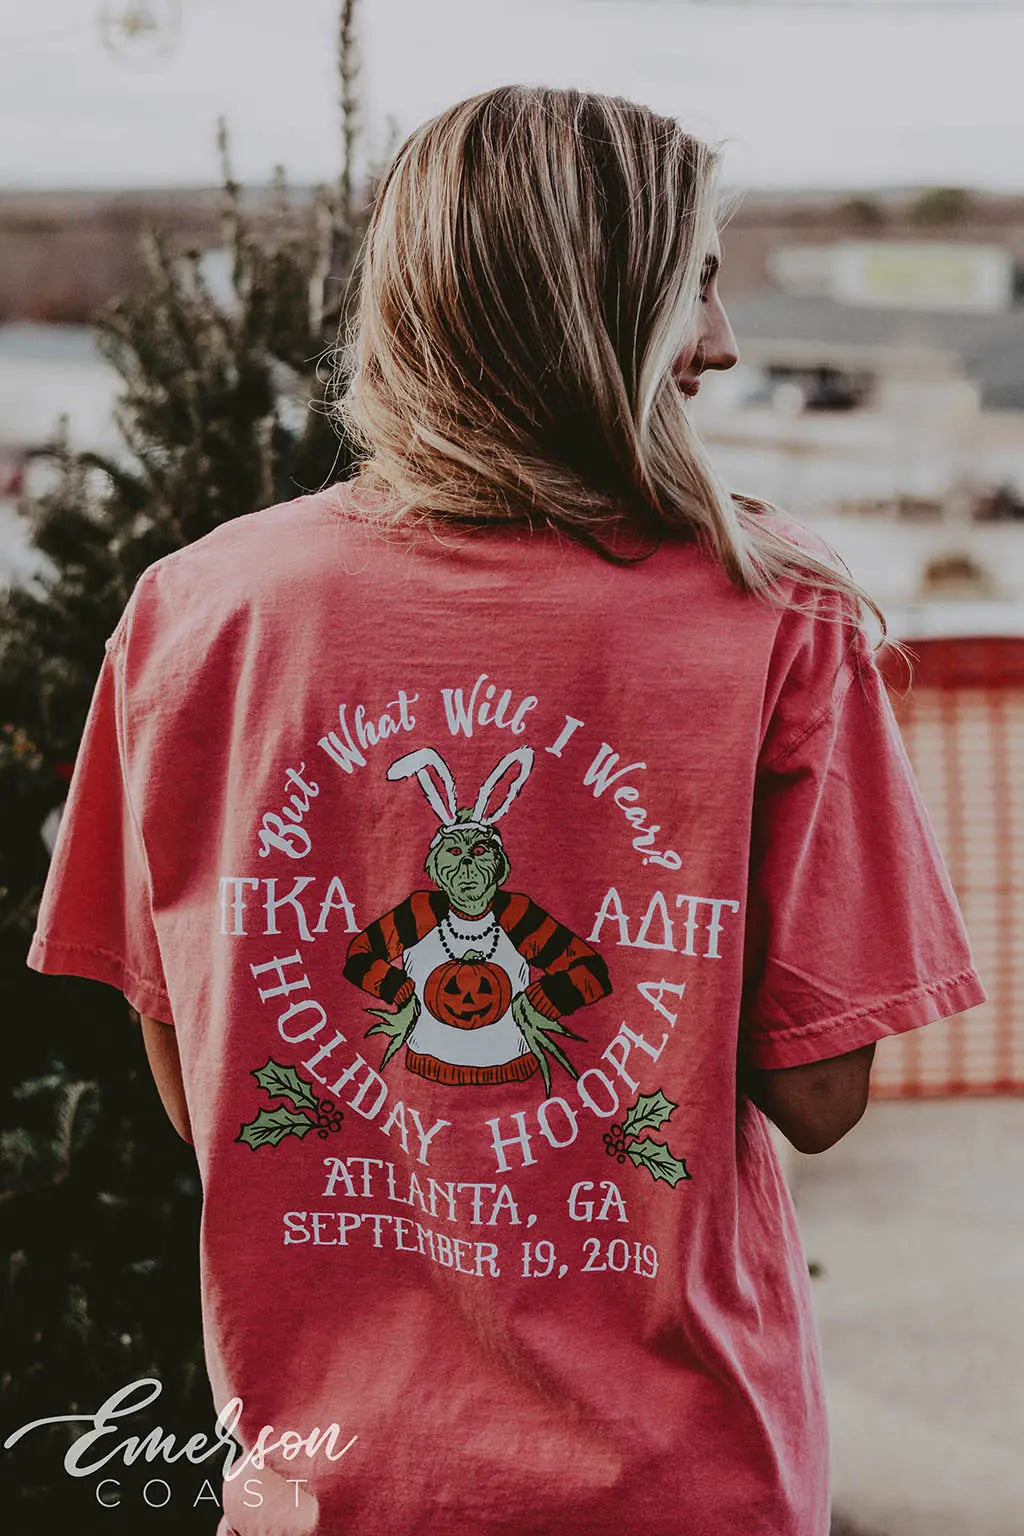 Girl wears a red tshirt with Pi Kappa Alpha and ADPi letters on it featuring a picture of the Grinch in various holiday attire.